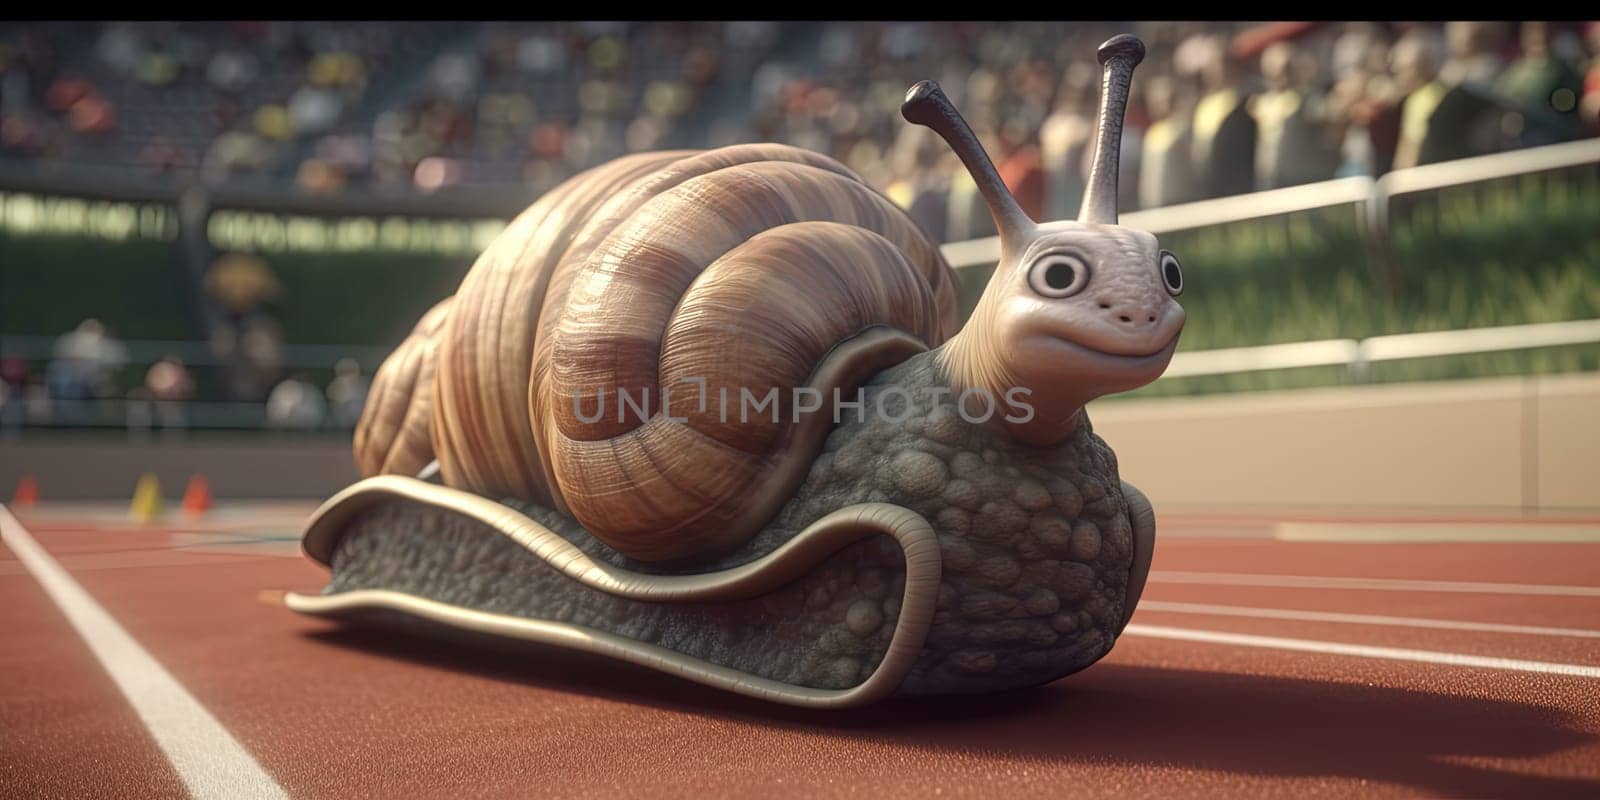 Cartoon Character Snail On A Running Track At The Stadium by tan4ikk1